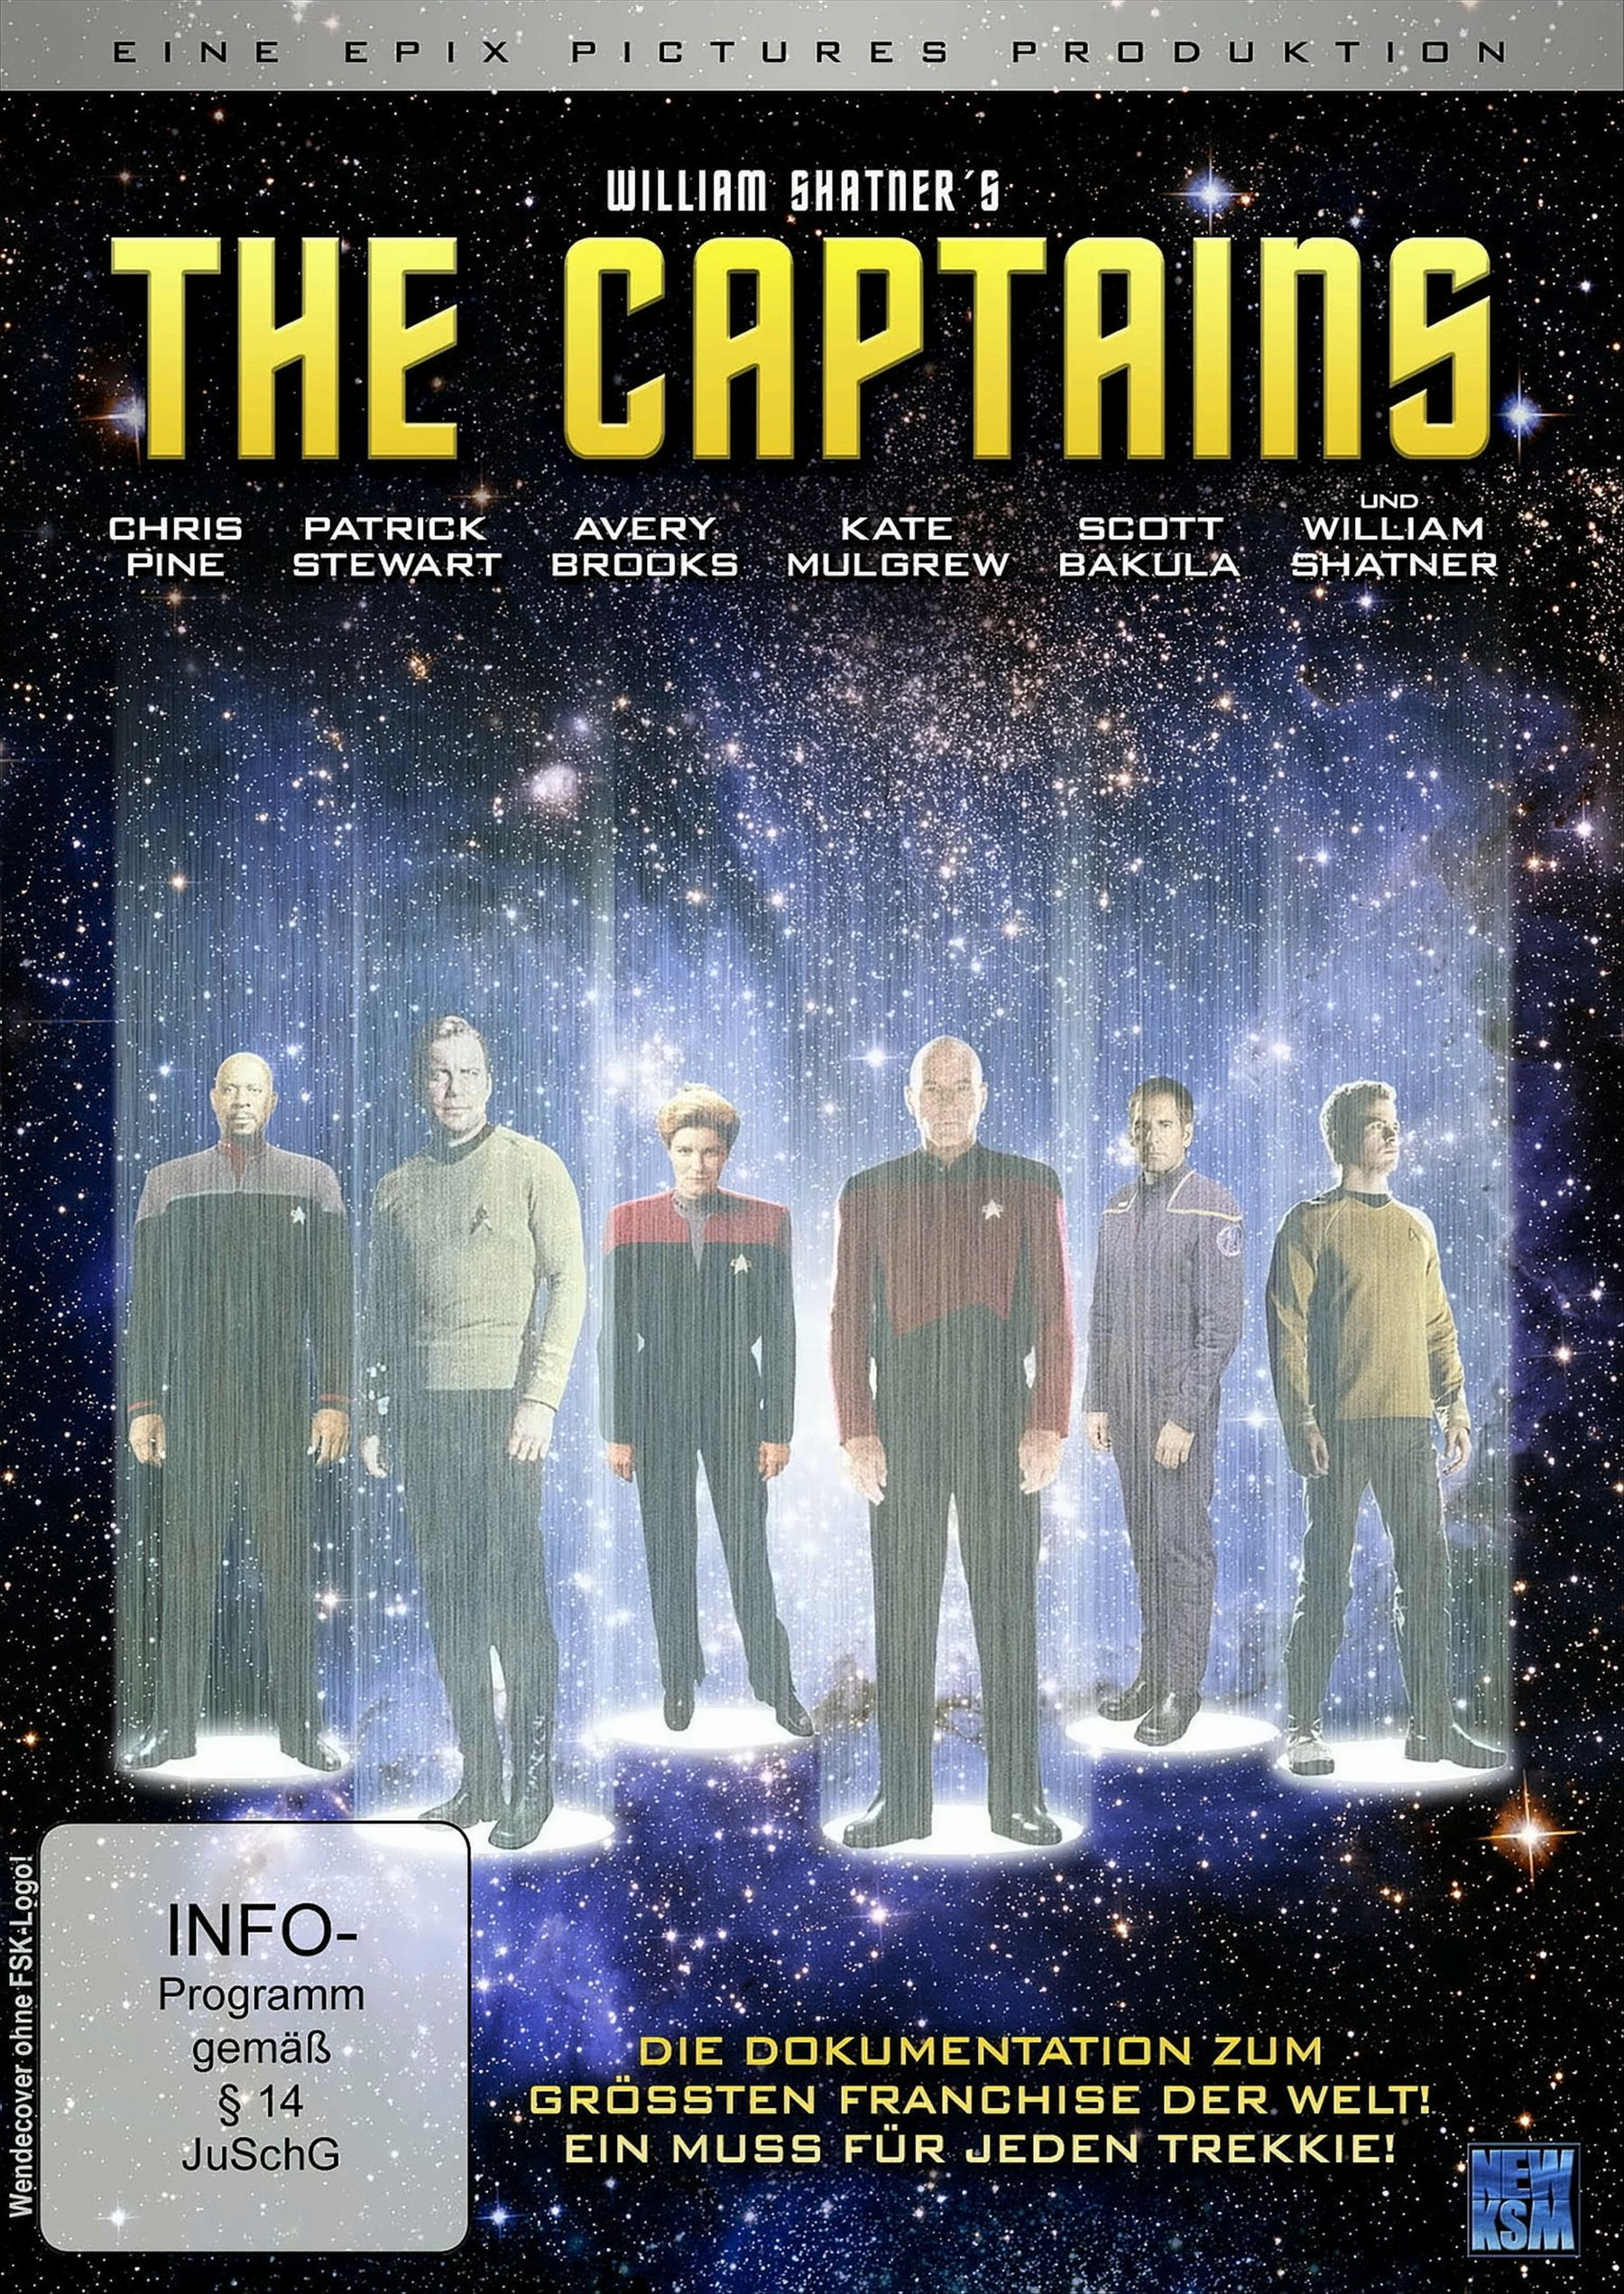 Captains DVD The